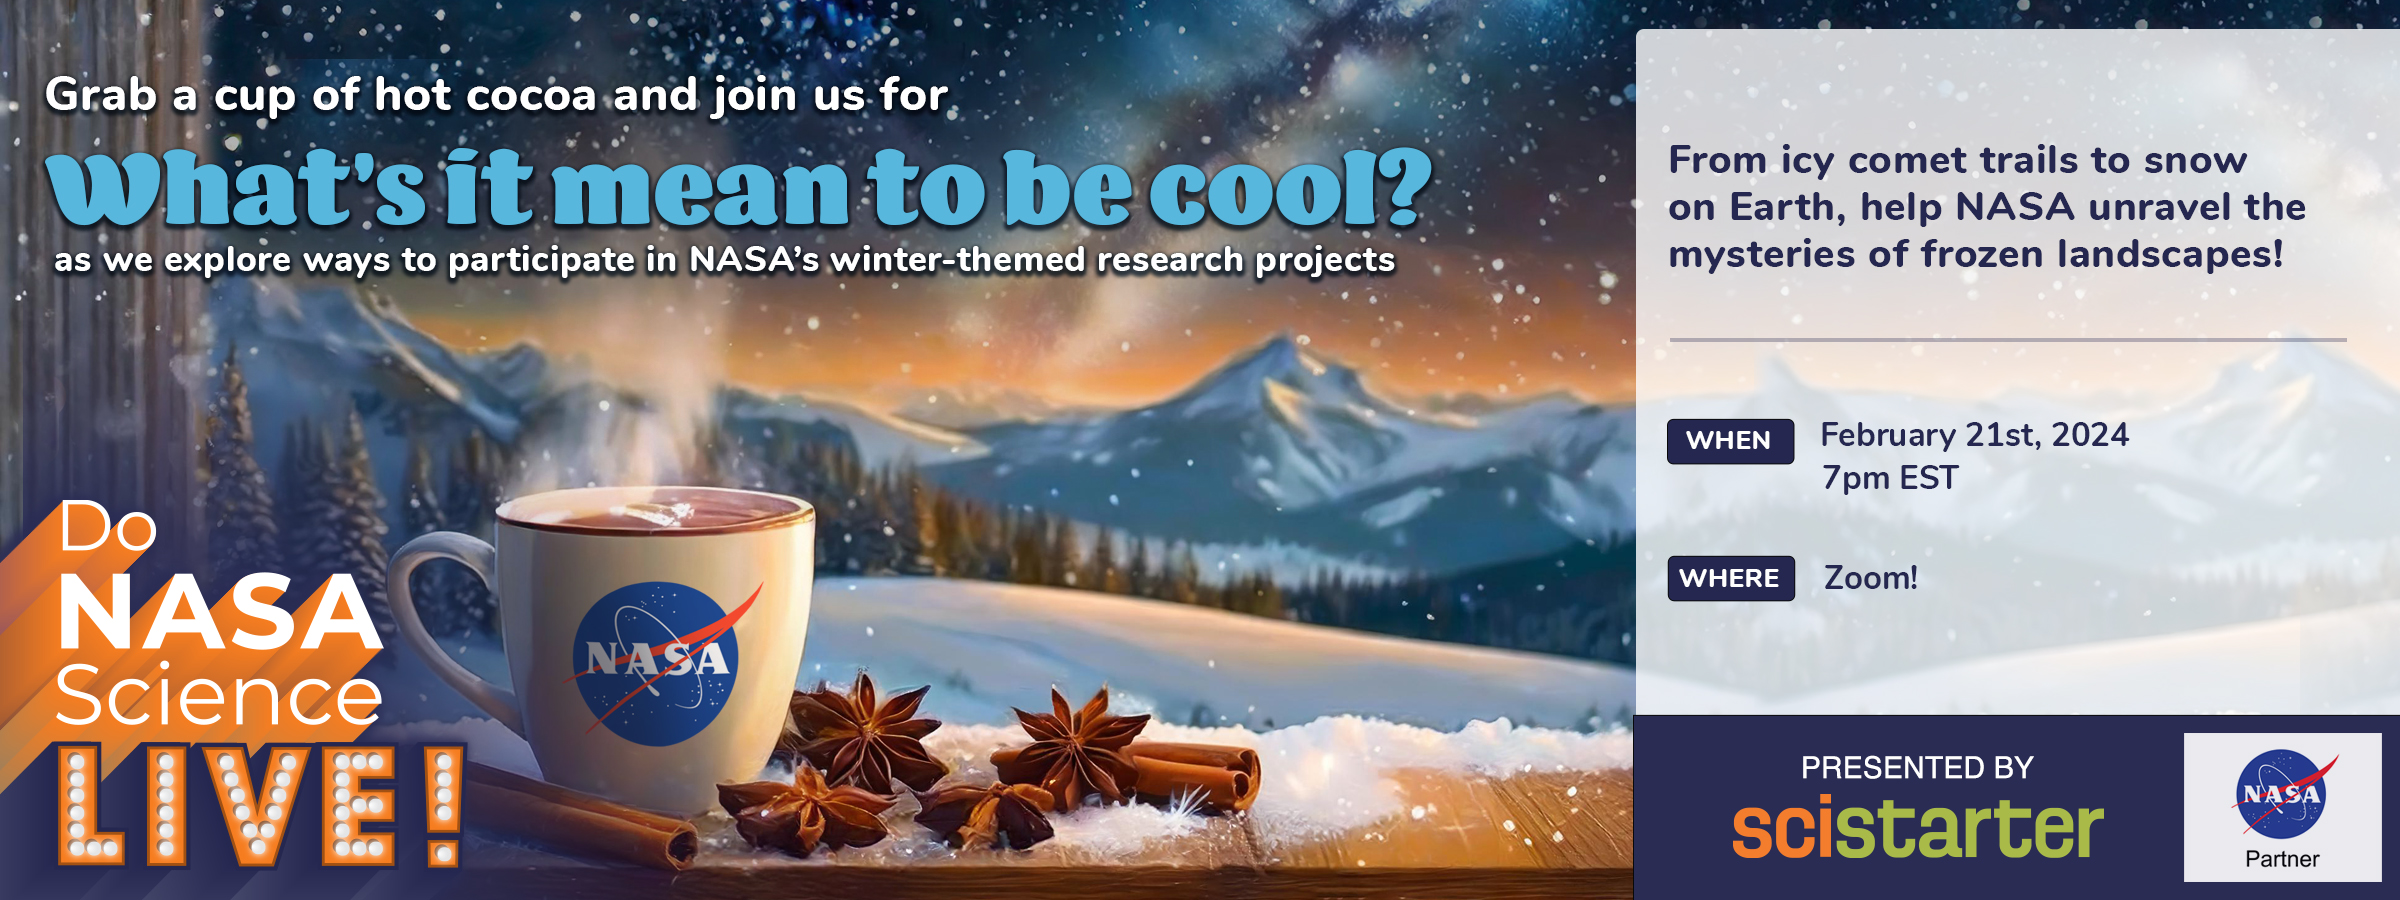 Event advertisement Join the next Do NASA Science LIVE event as we explore ways to participate in NASA’s winter-themed volunteer research projects. Register here for this event on February 21st at 7pm ET. (credit: SciStarter)